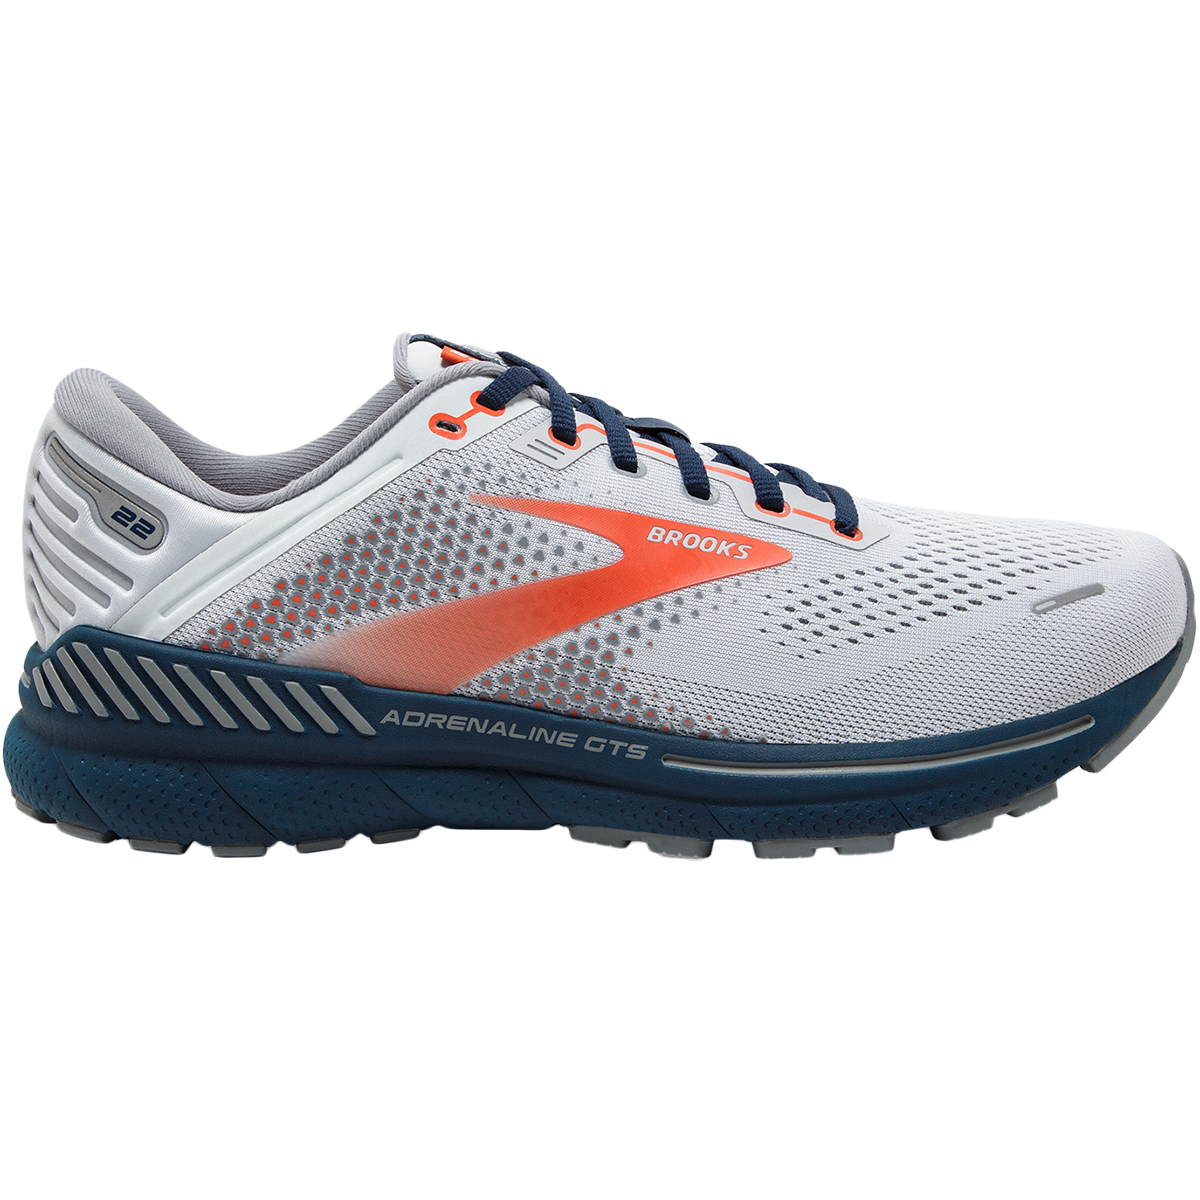 Brooks Adrenaline GTS 24, review and details